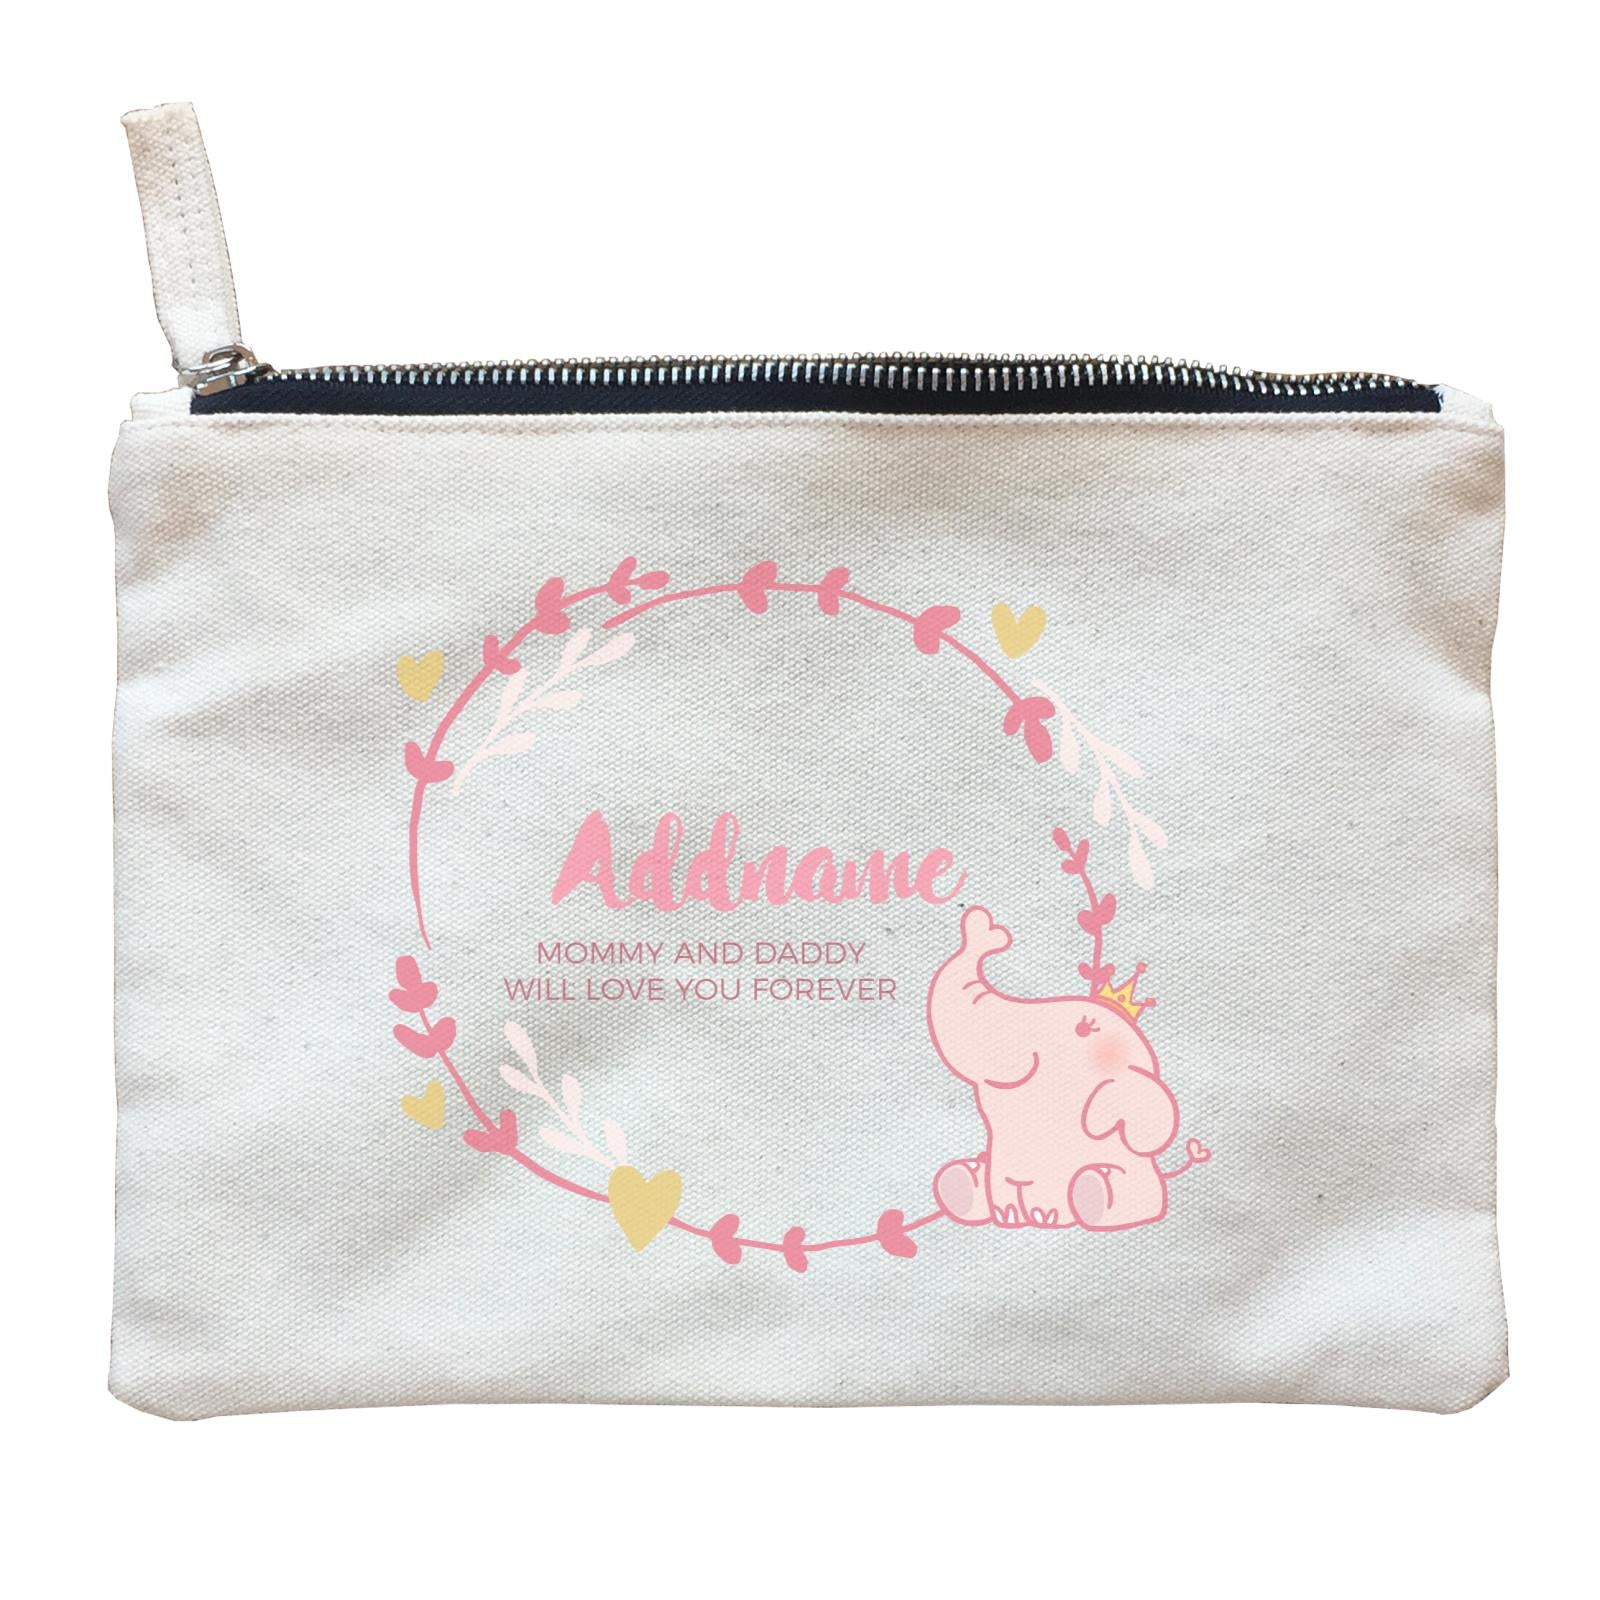 Cute Pink Elephant Princess Personalizable with Name and Text Zipper Pouch